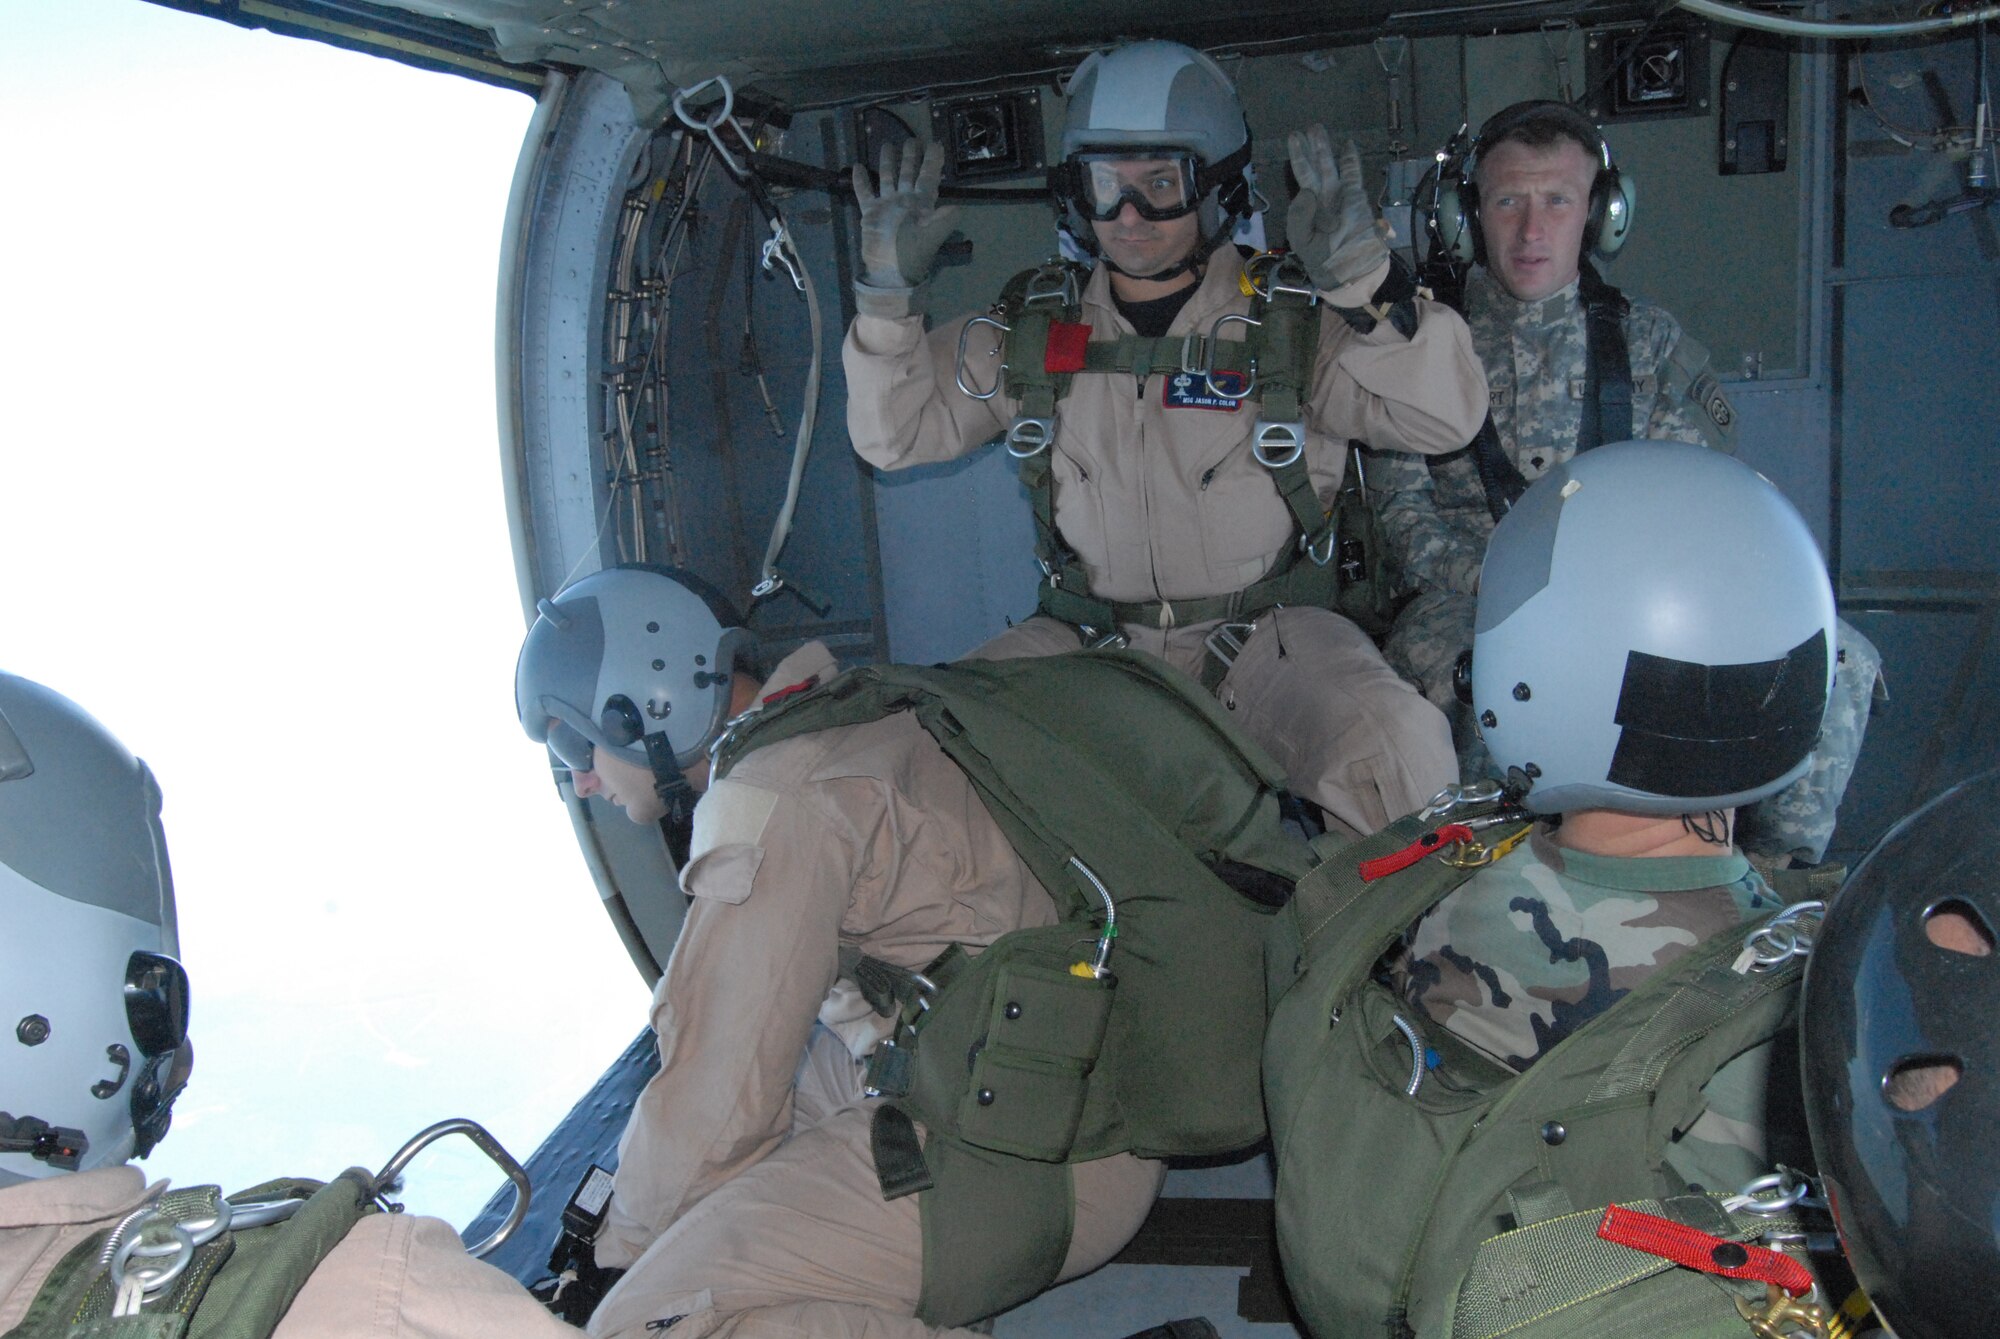 Master Sgt. Jason Colon, 18th Weather Squadron first sergeant, gives a signal to four Airmen waiting to execute a High Altitude, Low Opening jump over Luzon Drop Zone July 16. Sergeant Colon served as jumpmaster and was giving non-verbal cues to his jumpers due to the noise made by the UH-60 Black Hawk helicopter. (U.S. Air Force Photo by 2nd Lt. Chris Hoyler)